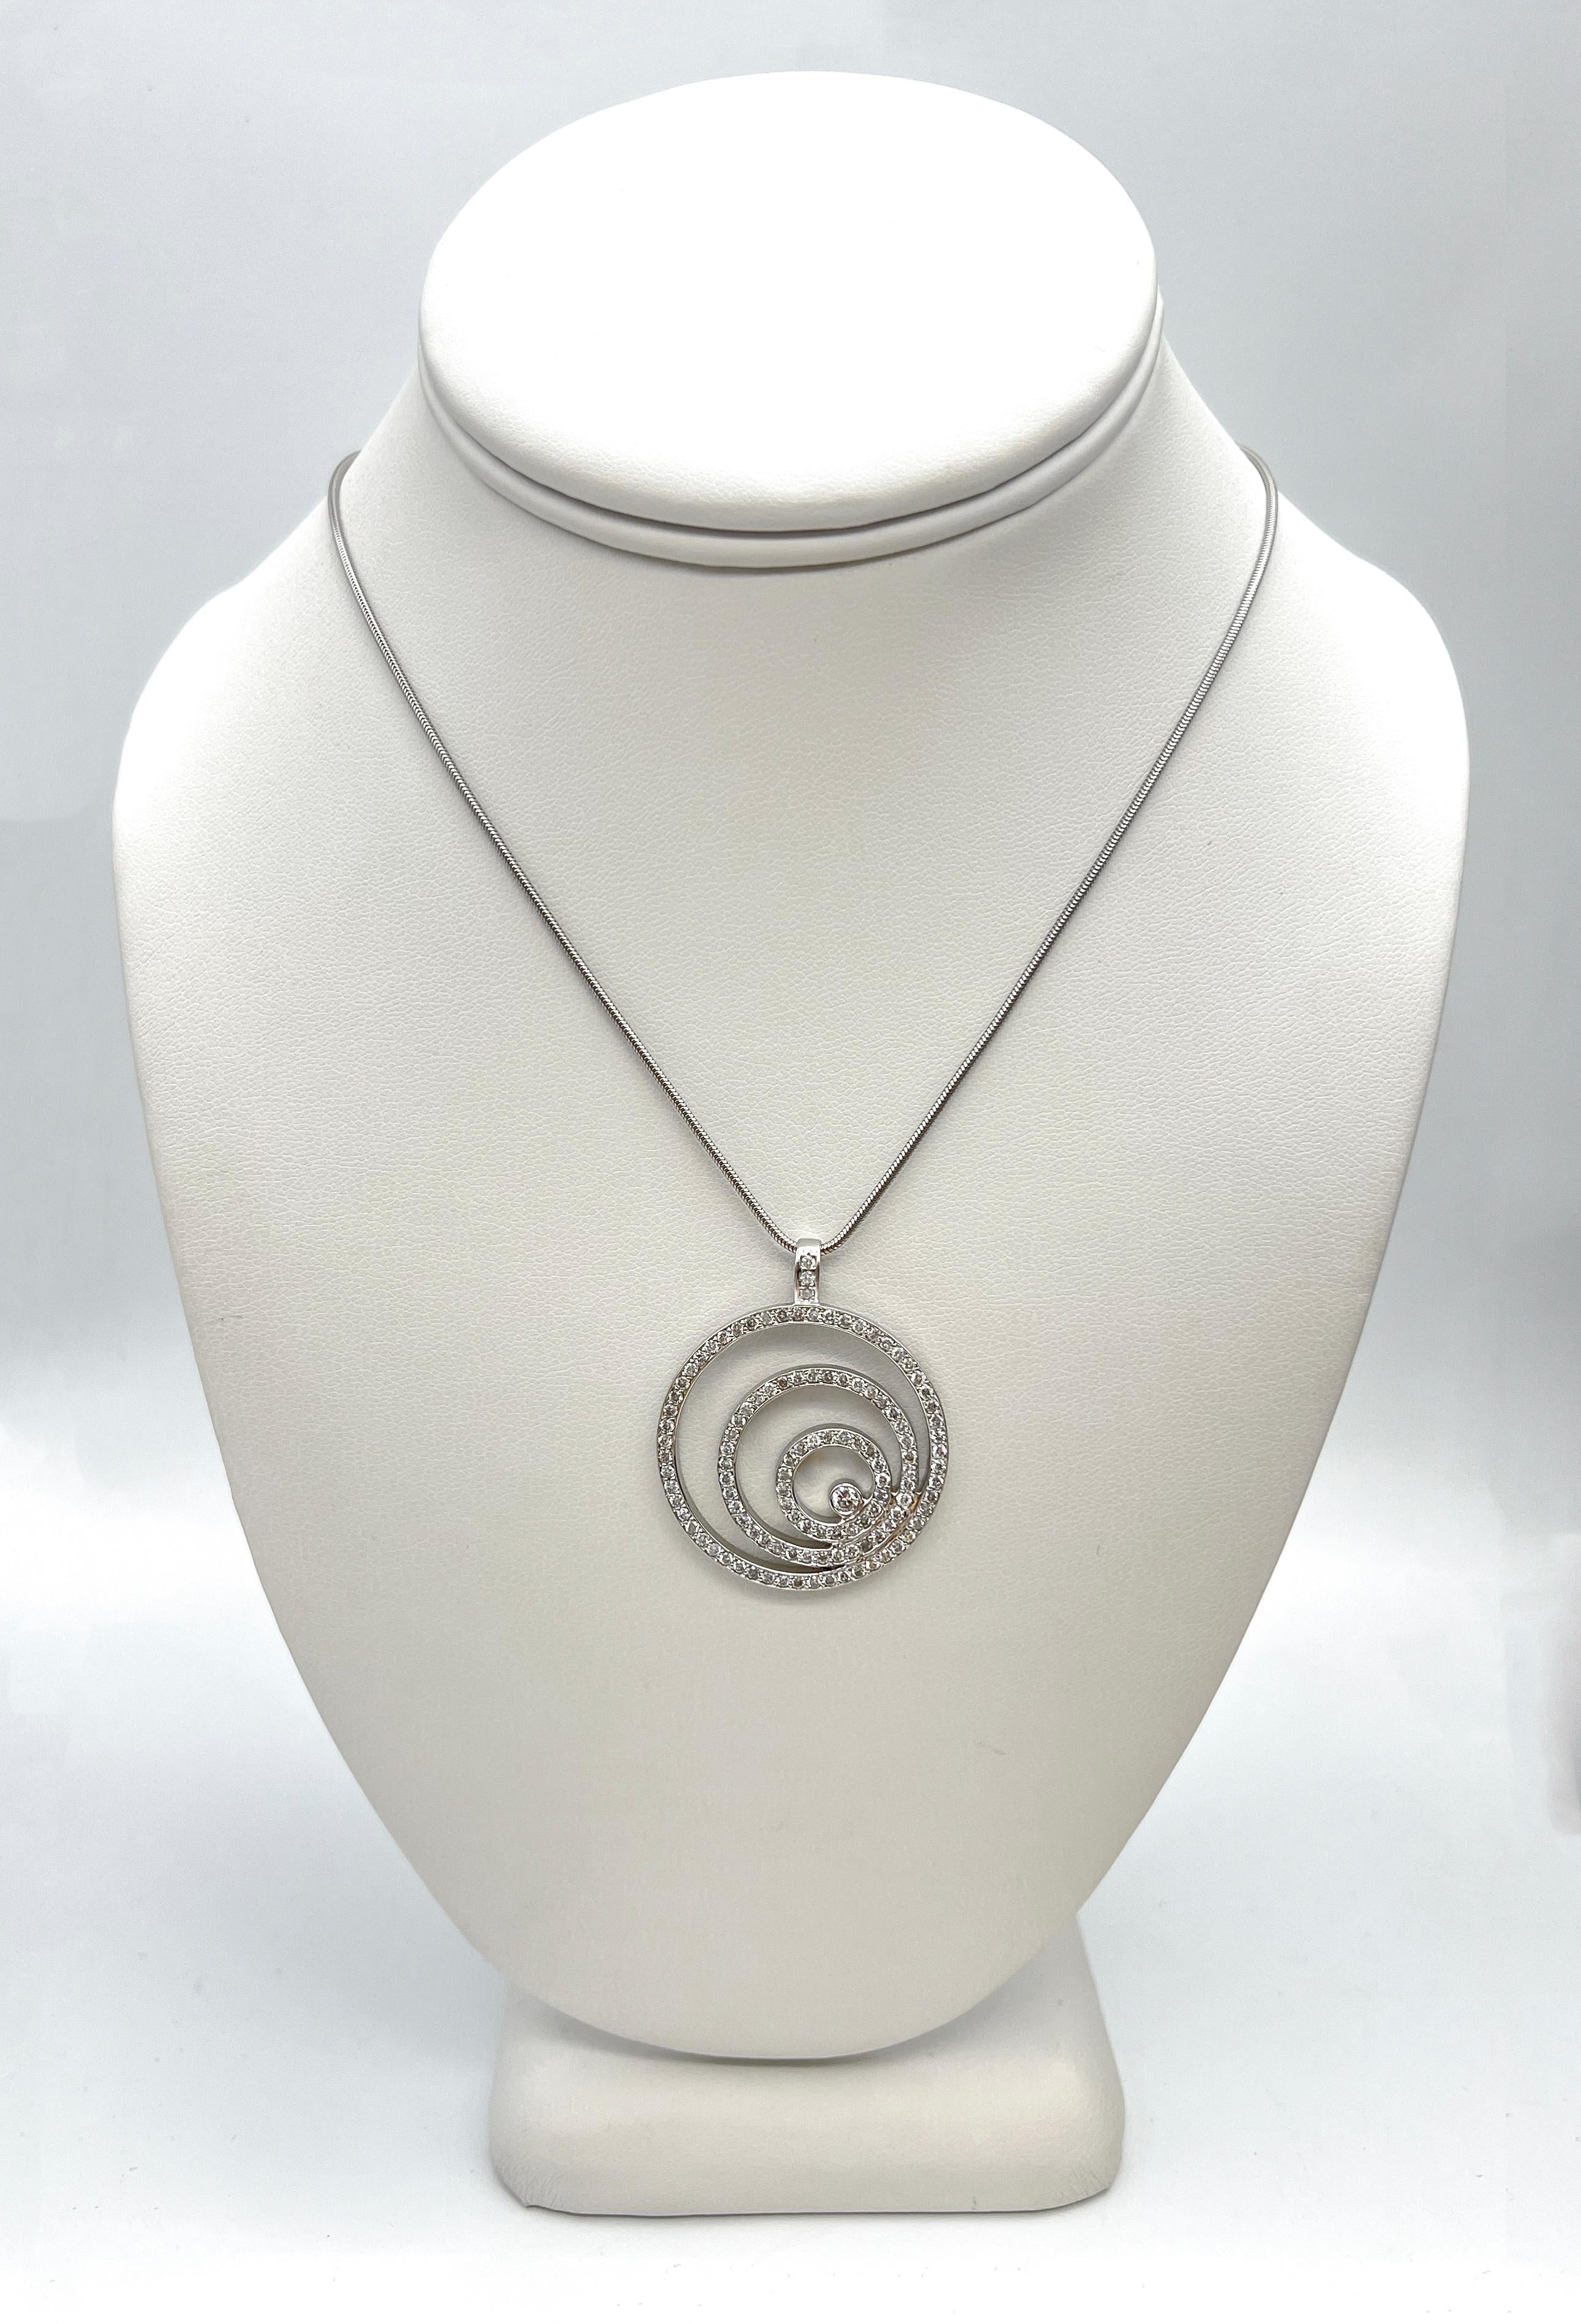 2.35 Carat Round Triple Circle Diamond Pendant Necklace

-Material: 18K White Gold;
-Diamonds: Round Cuts, 2.35ct total;
-Chain: 15.5 inches

Handmade in New York City.